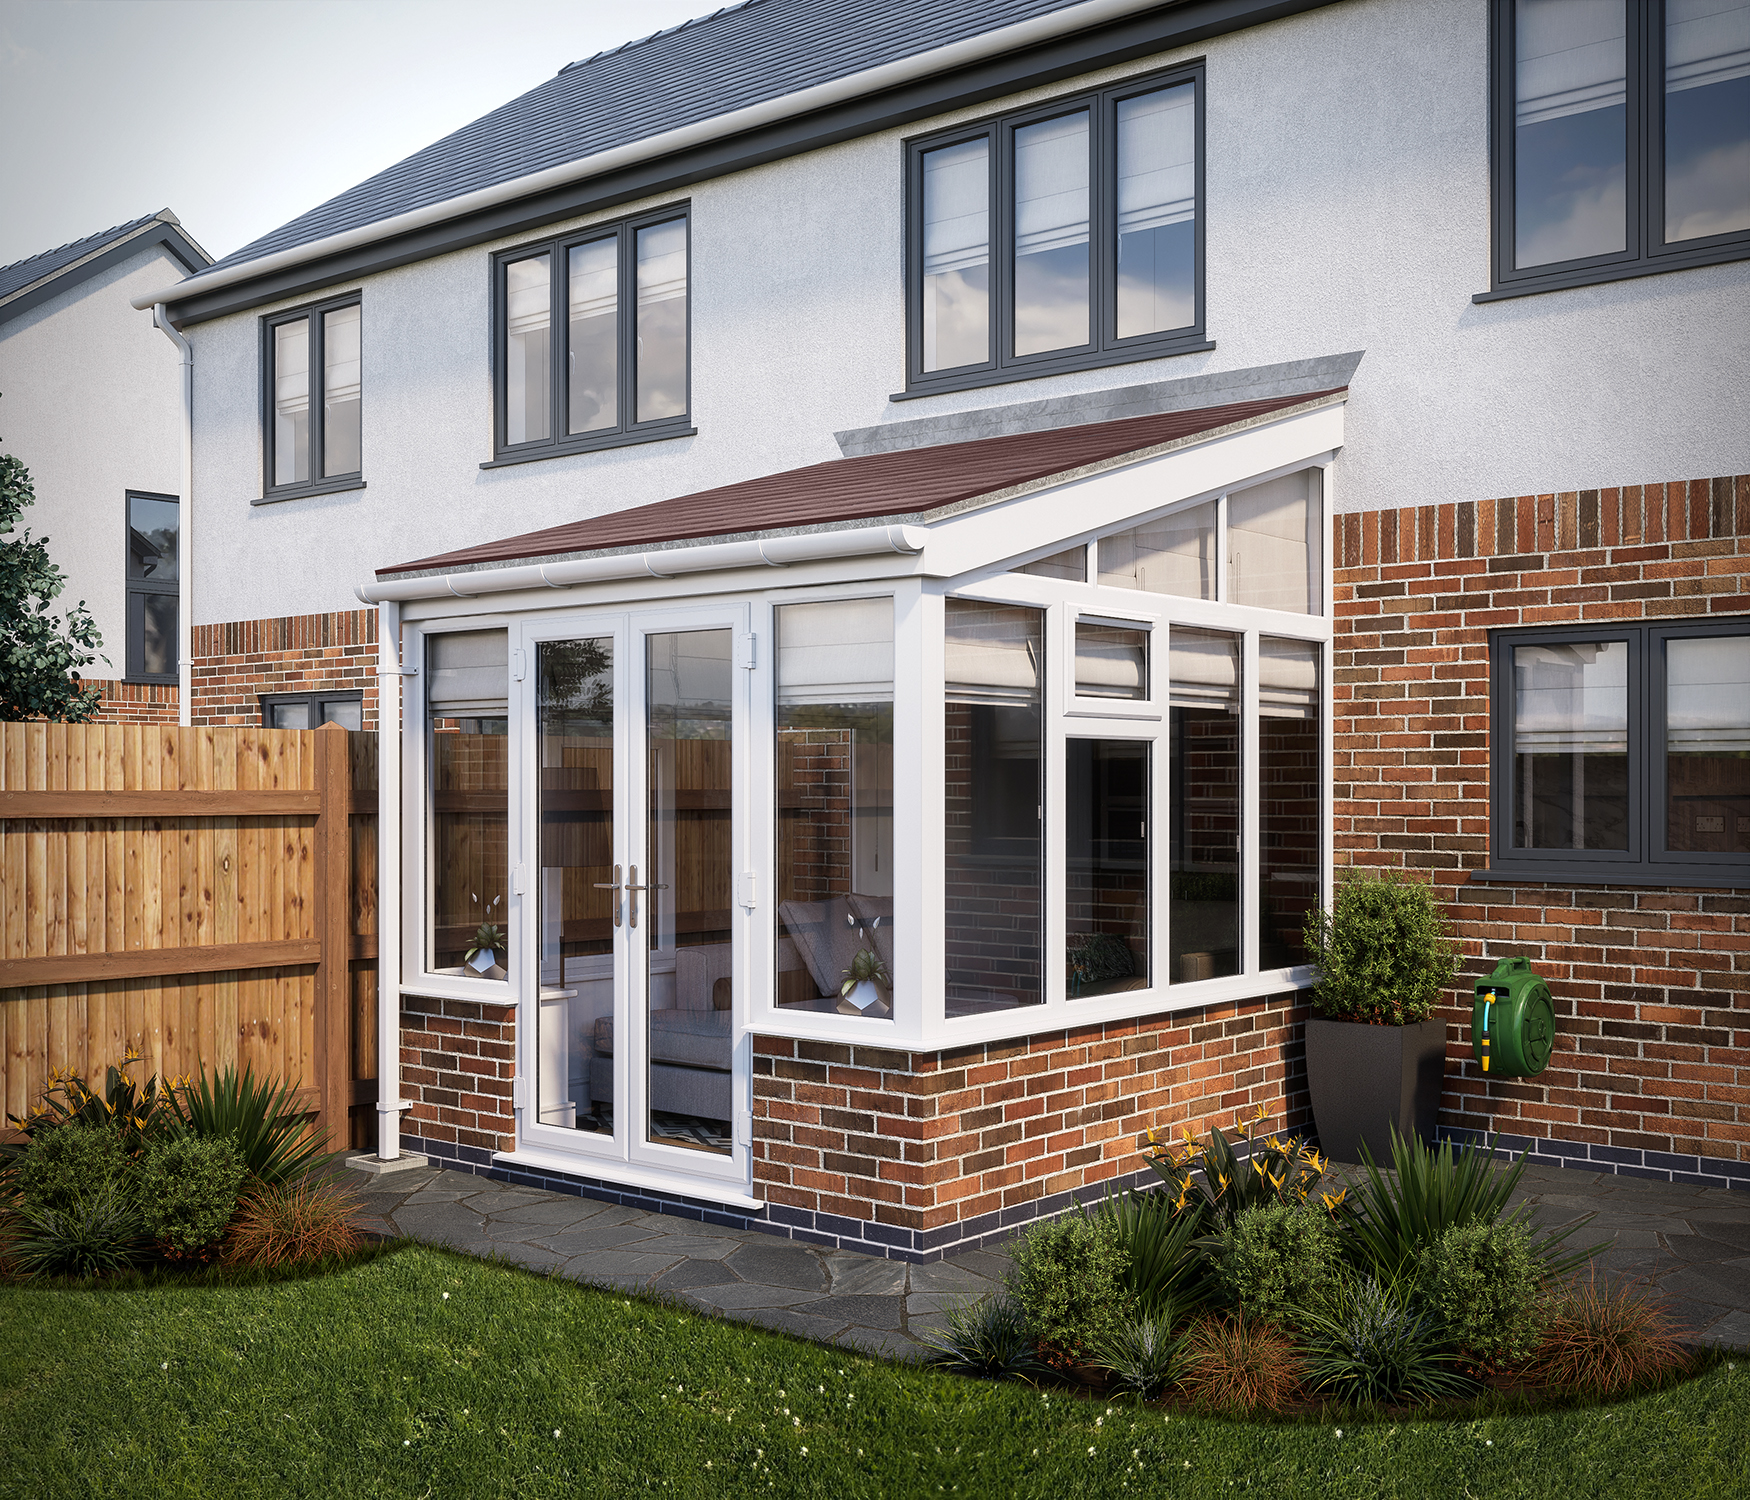 Image of SOLid Roof Lean to Conservatory White Frames Dwarf Wall with Rustic Brown Tiles - 13 x 10ft